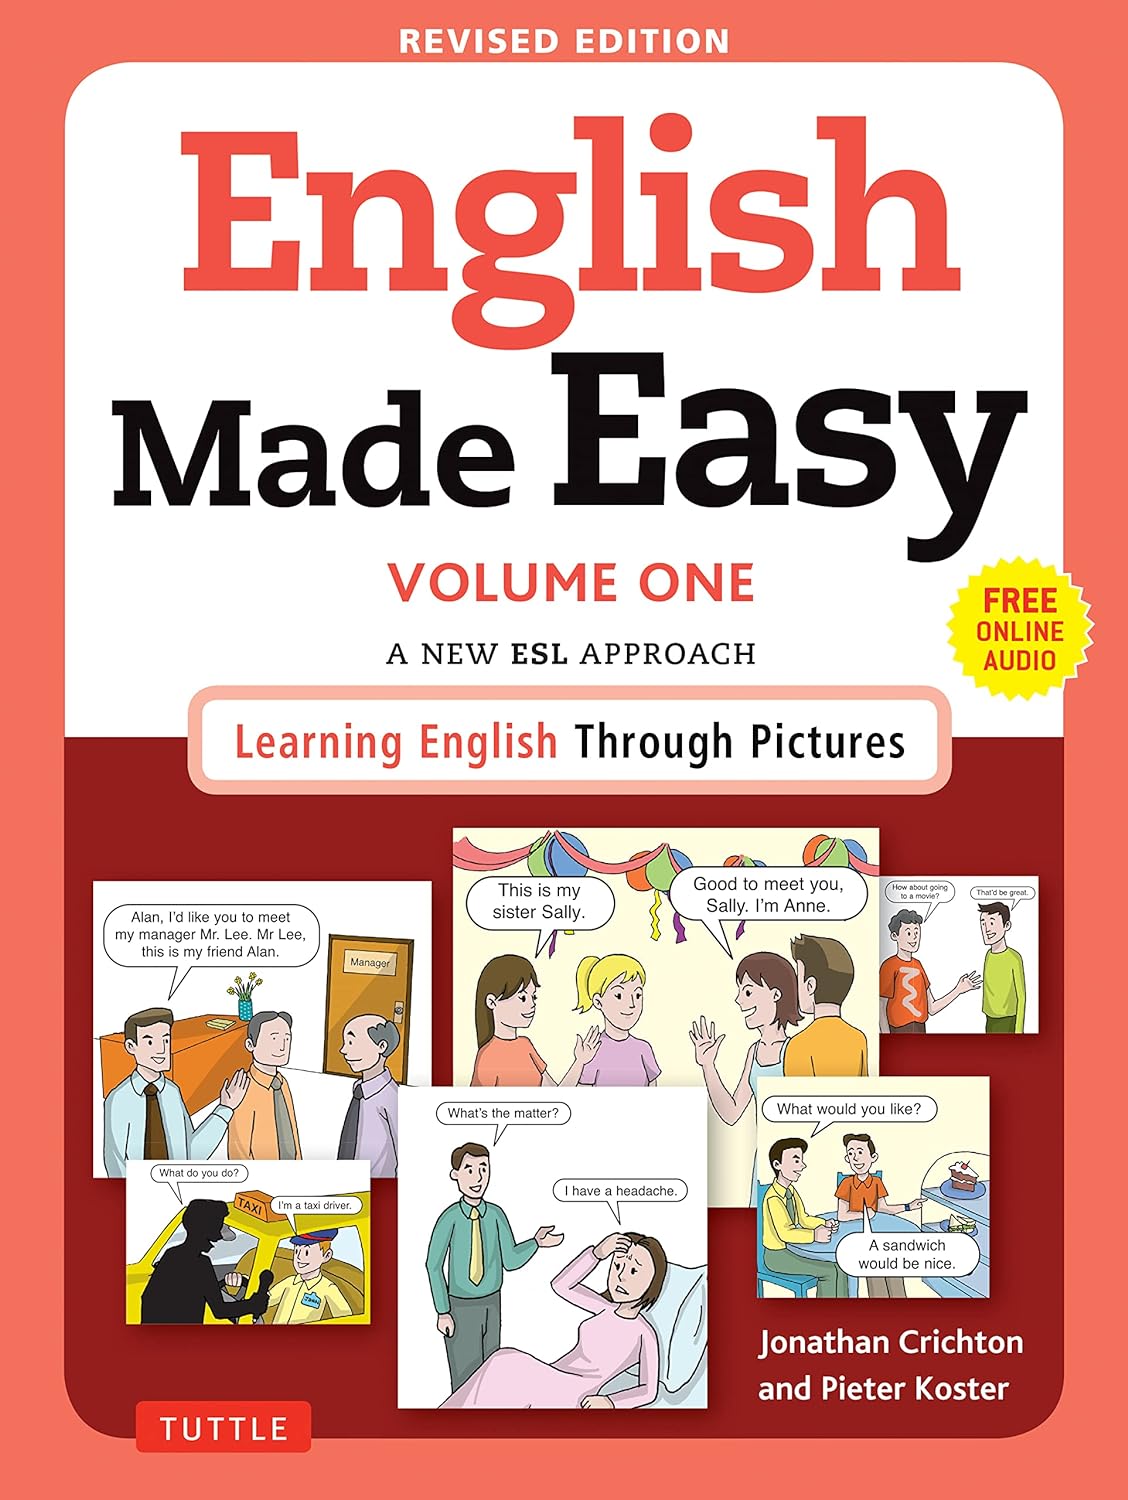 English Made Easy Volume One: A New ESL Approach: Learning English Through Pictures (Free Online Audio)